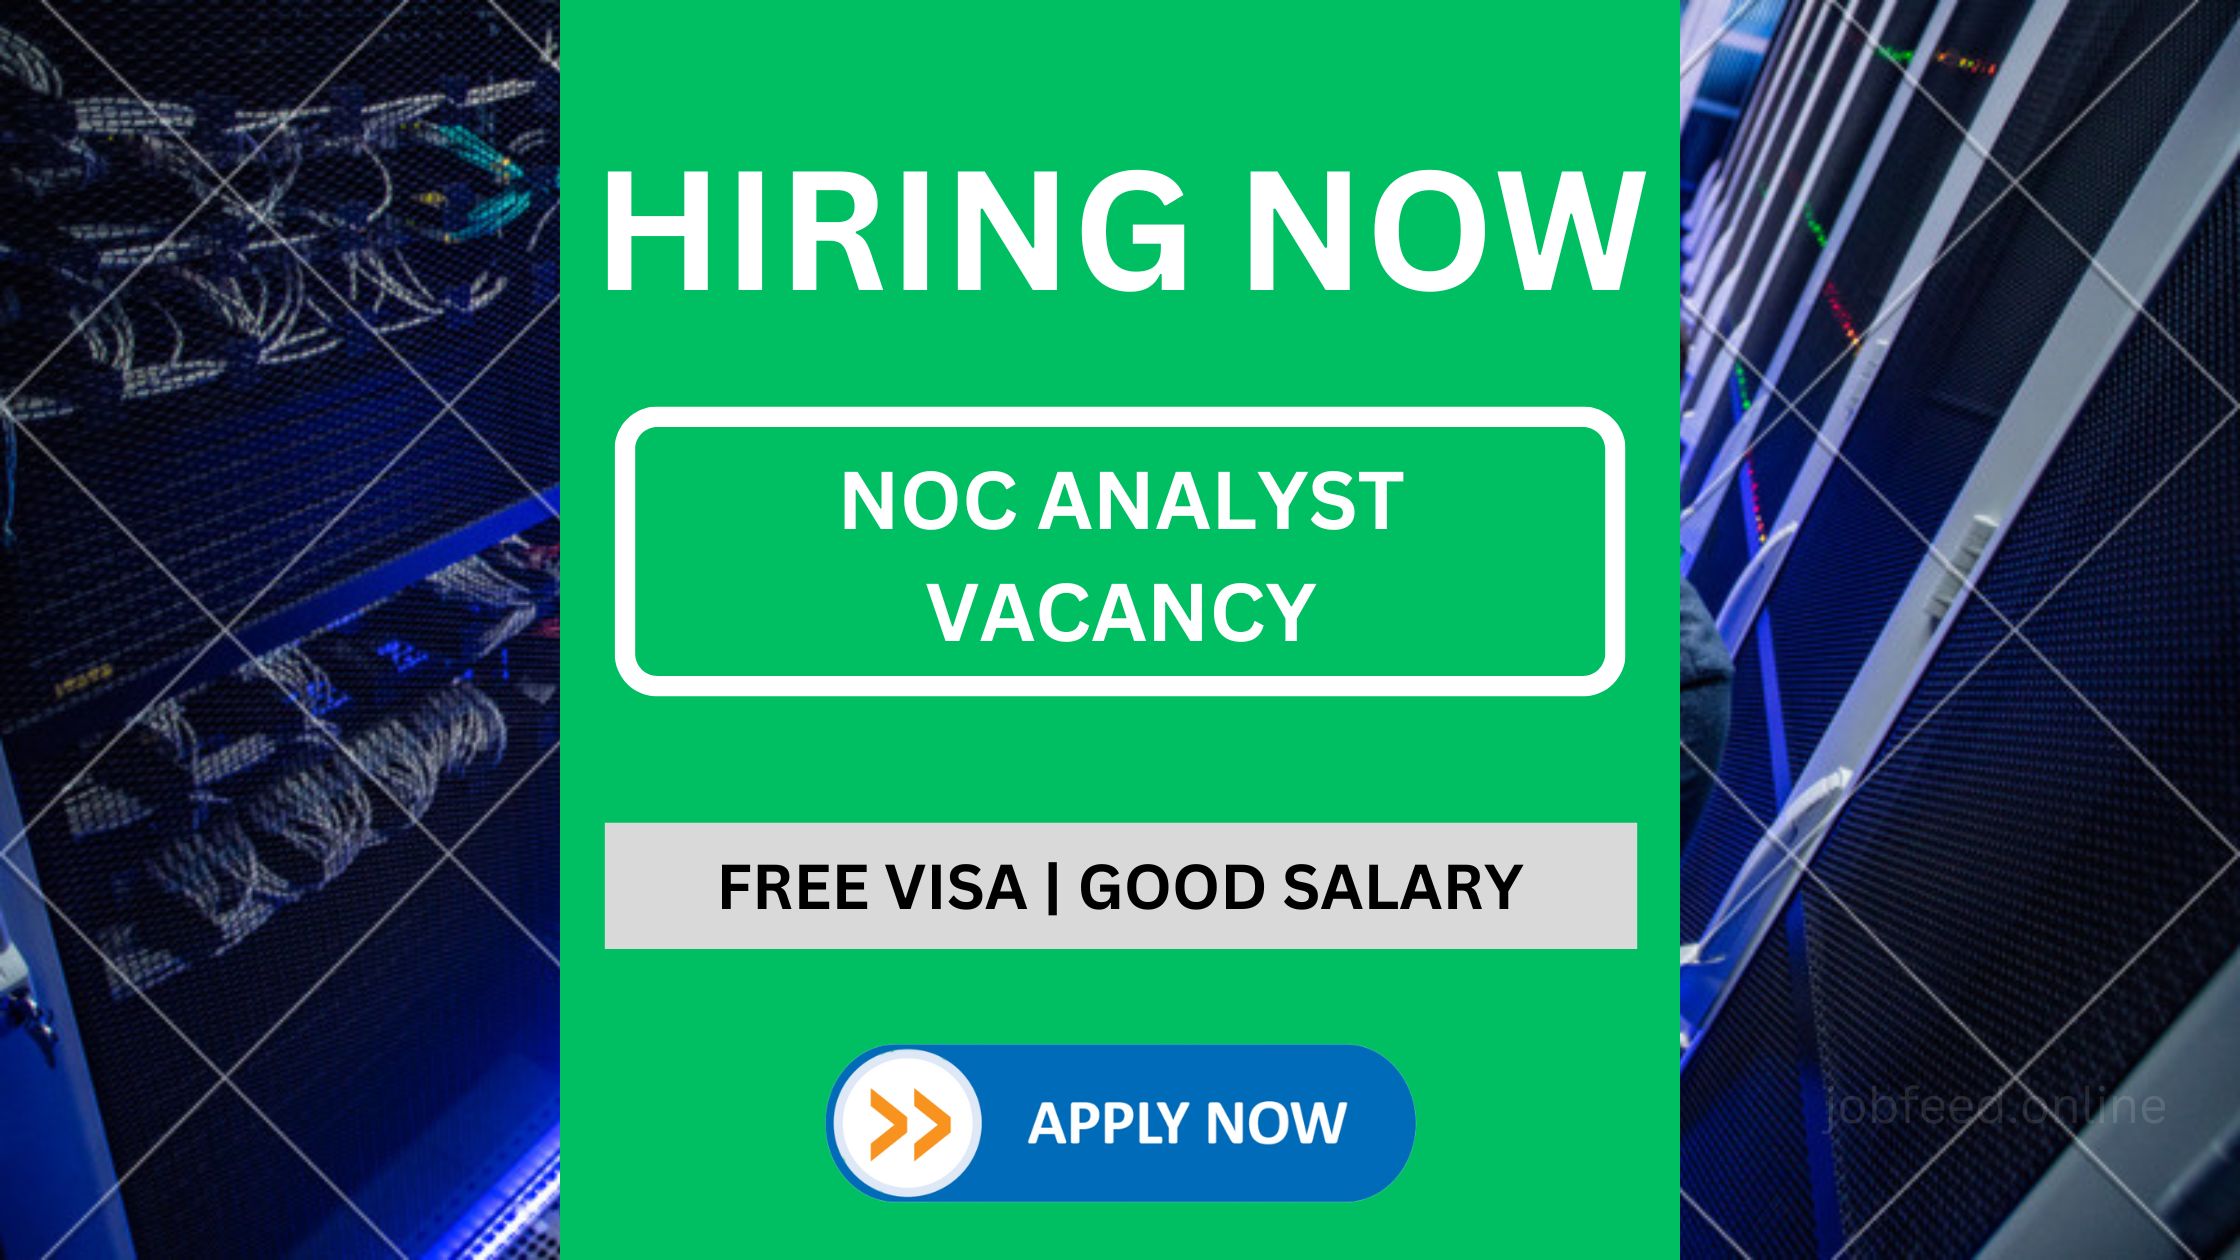 NOC Analyst (Network Operations Center) Vacancy